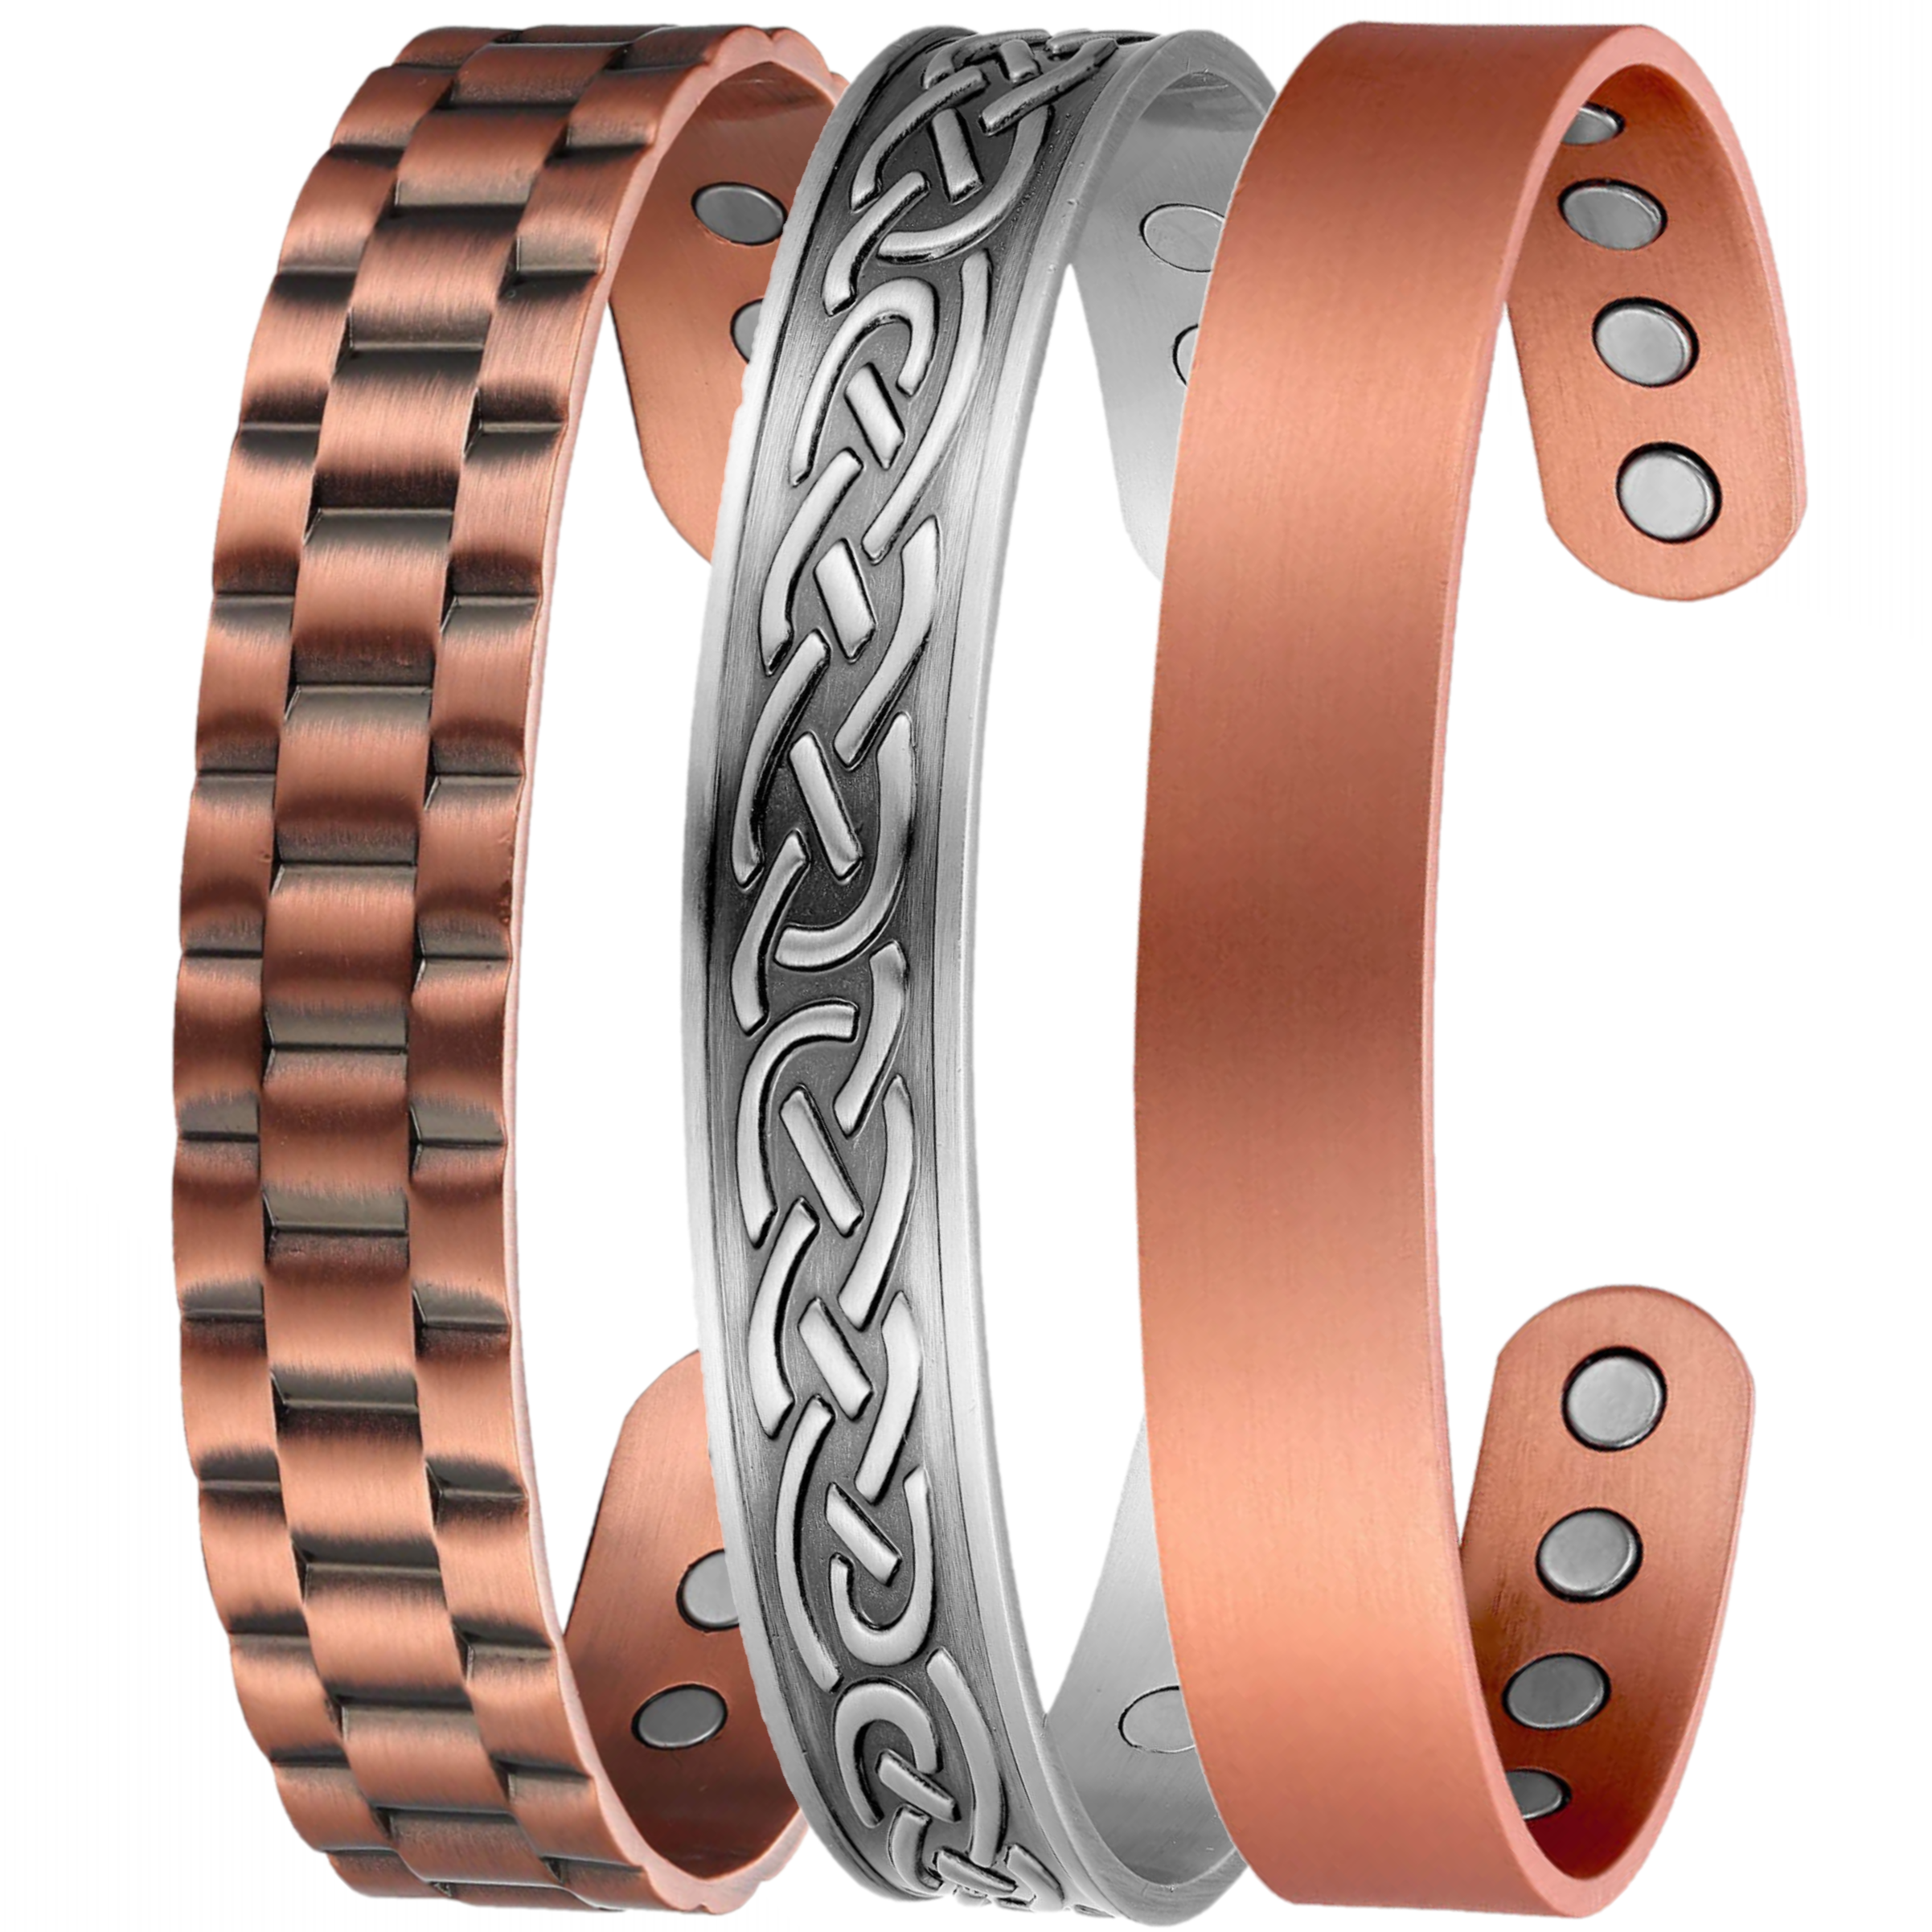 Amazon.com: KGP Copper Magnetic Bracelet for Men or Women with Strength  Magnets,99.99% Pure Copper Magnet Bracelet for Arthritis and  Joint,Adjustable Magnetic Healing Therapy Bracelet Copper Jewelry Gift :  Health & Household